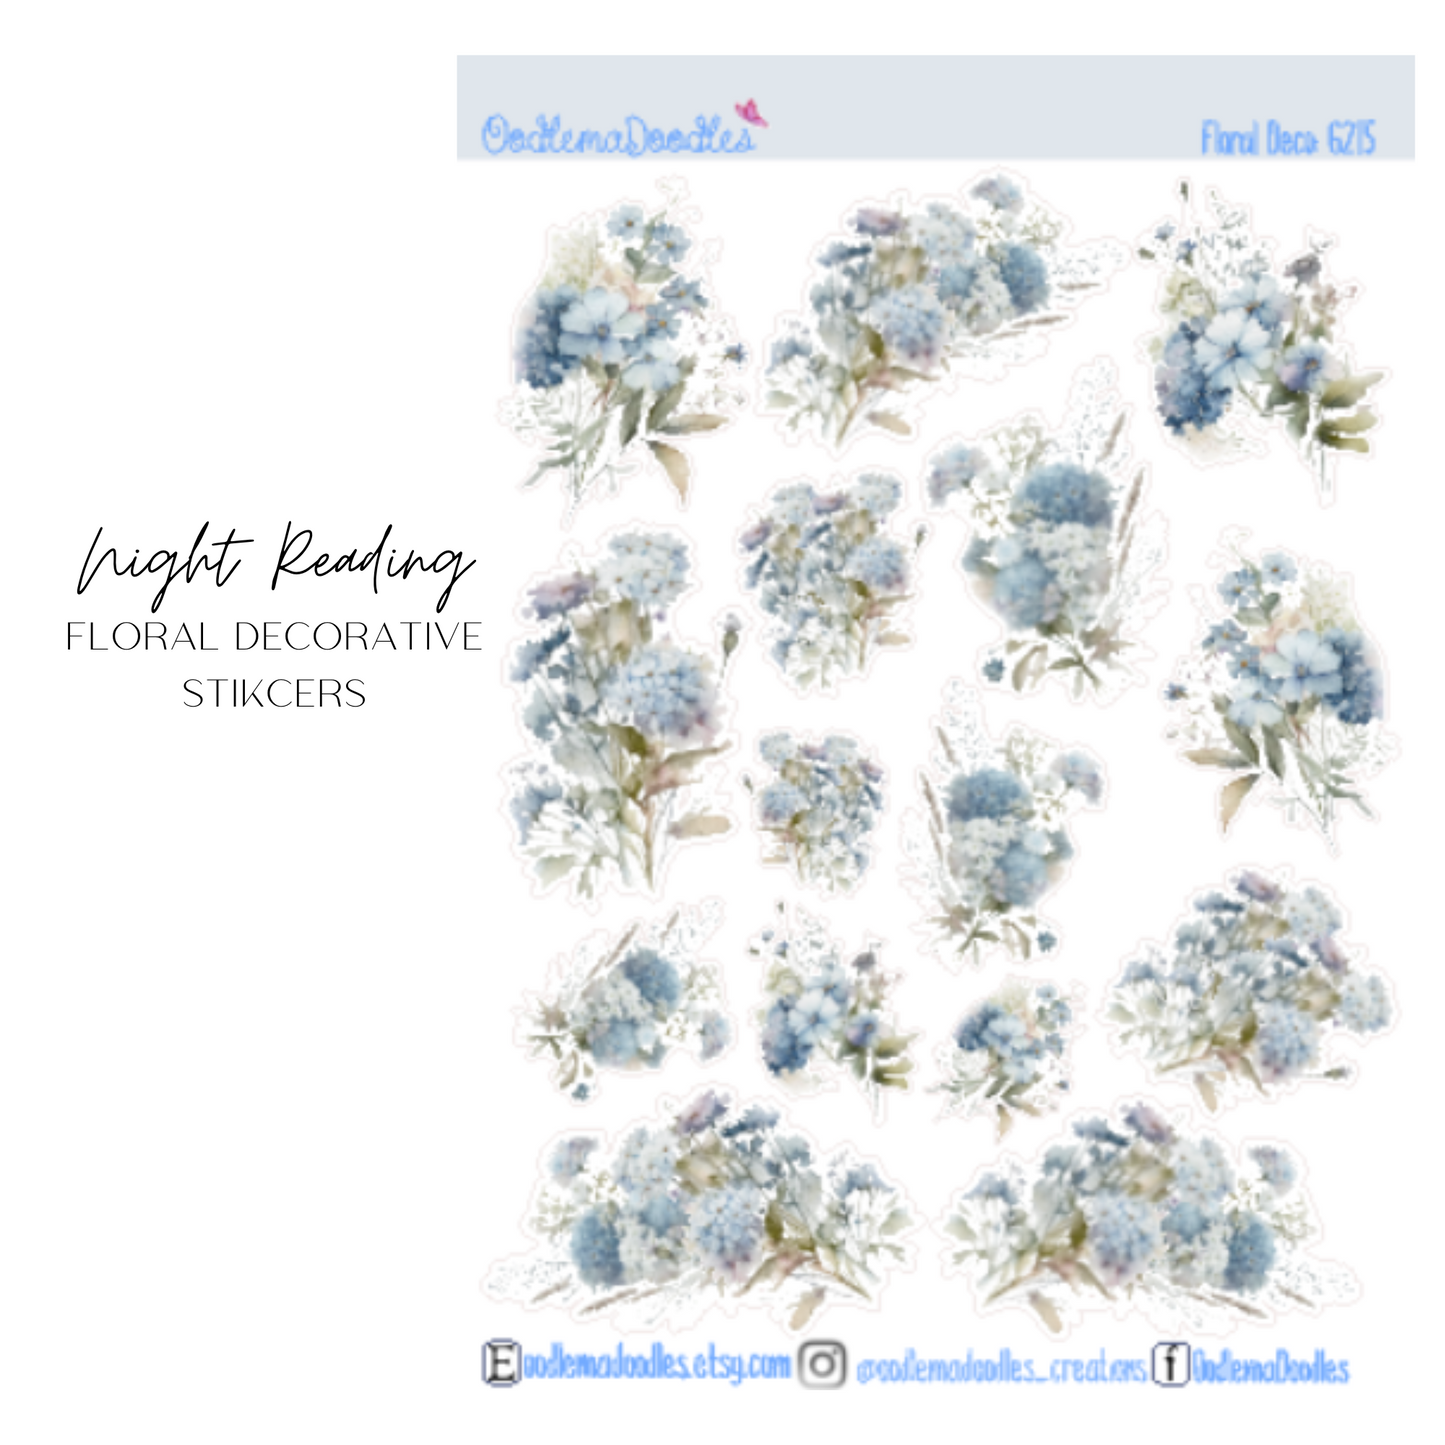 Night Reading Floral Decorative Stickers